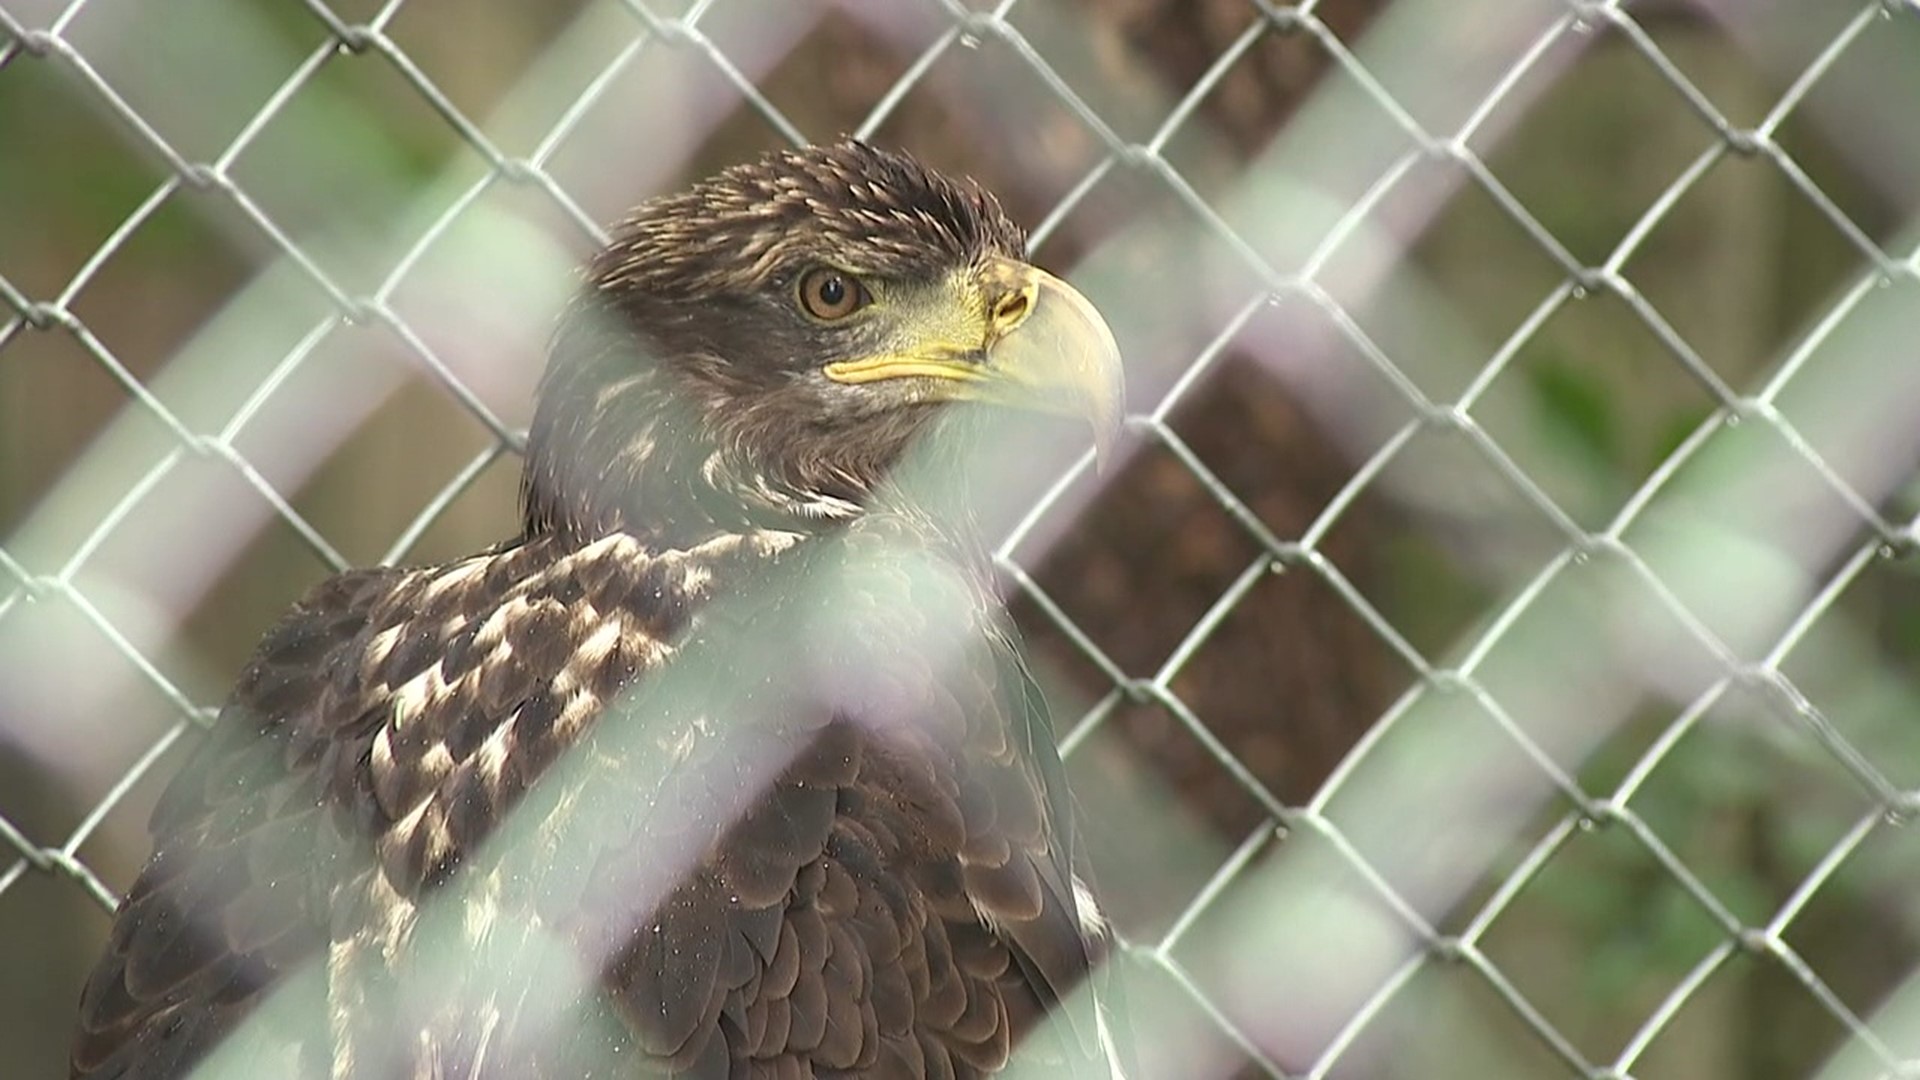 A wildlife refuge in Snyder County recently got some new residents, including a bald eagle.